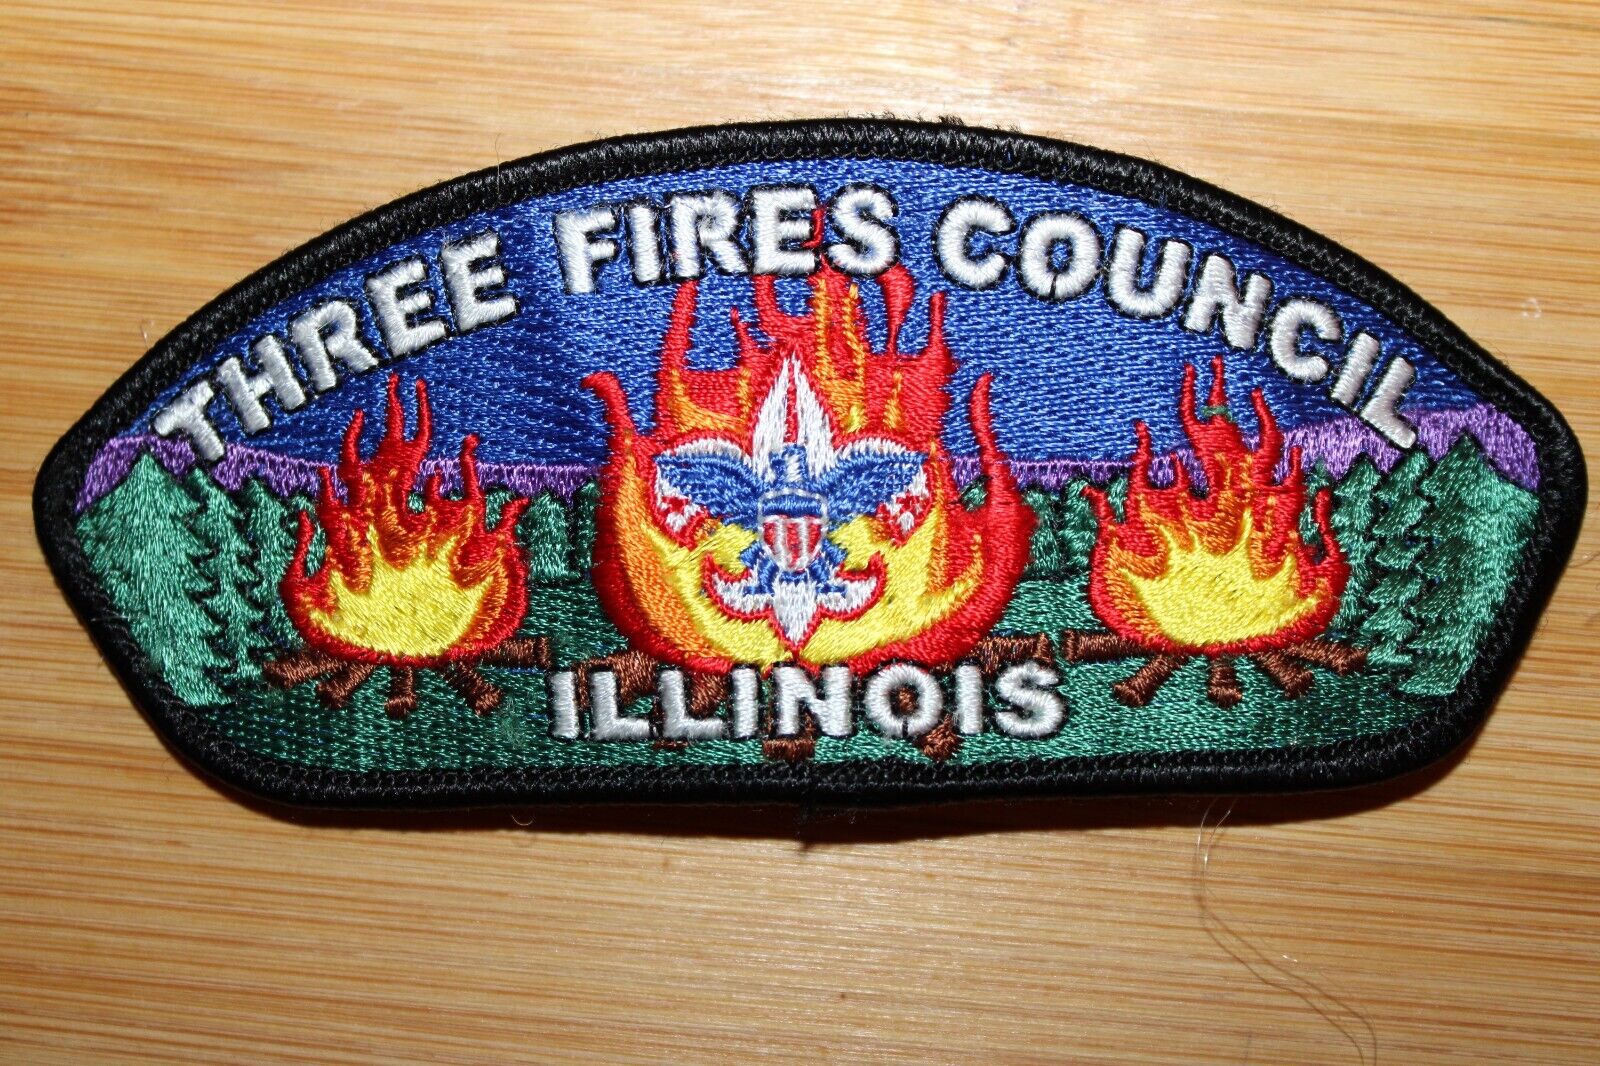 Three Fires Council Boy Scouts of America BSA Patch